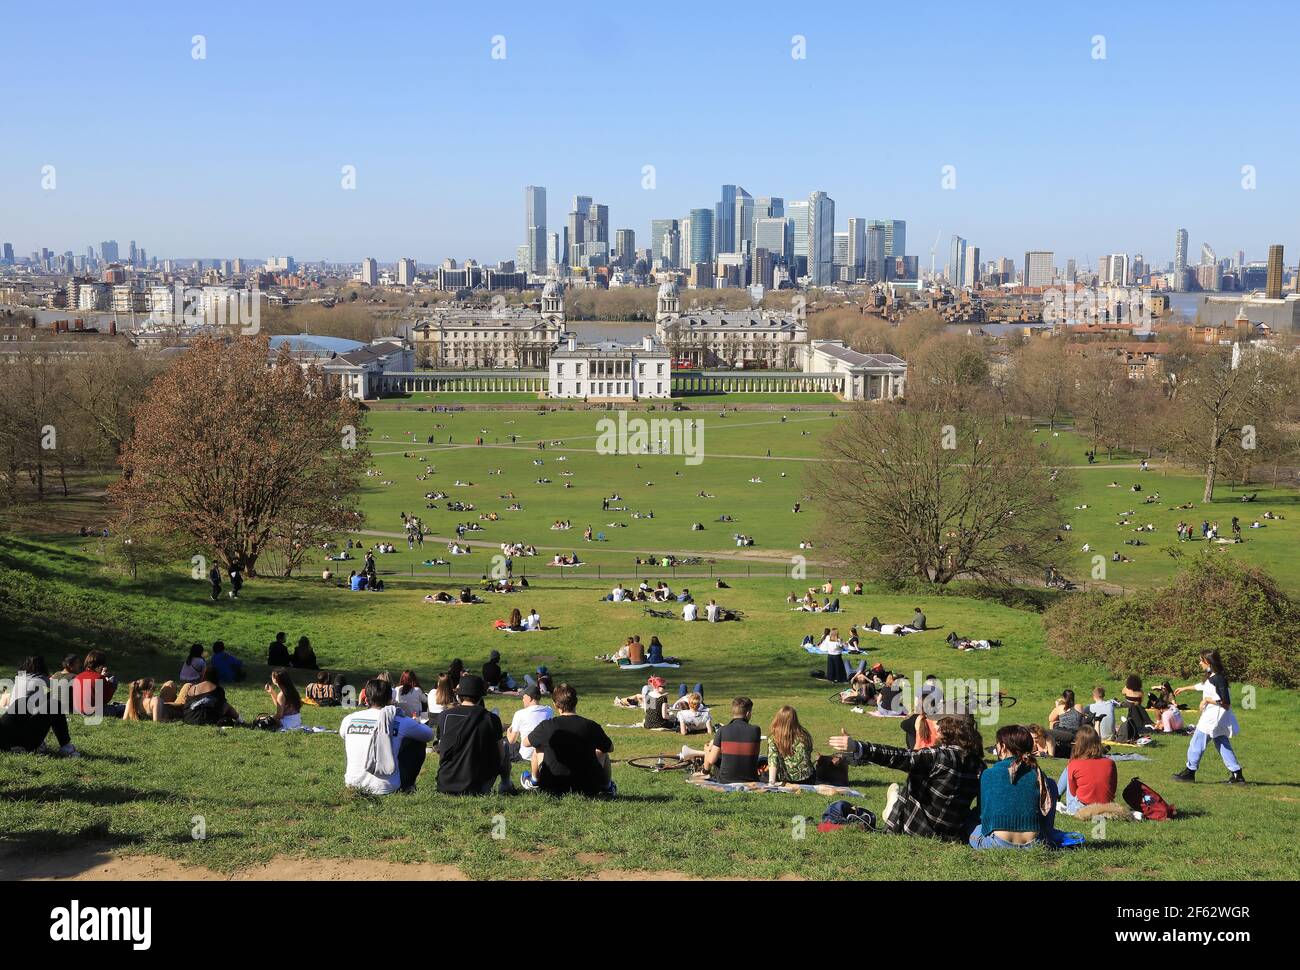 London, UK, March 29th 2021. Lockdown restrictions ease in England as temperatures soar. Families and groups of friends meet in Greenwich Park to enjoy the sunshine as the rule of 6 returns. Monica Wells/Alamy Live News Stock Photo